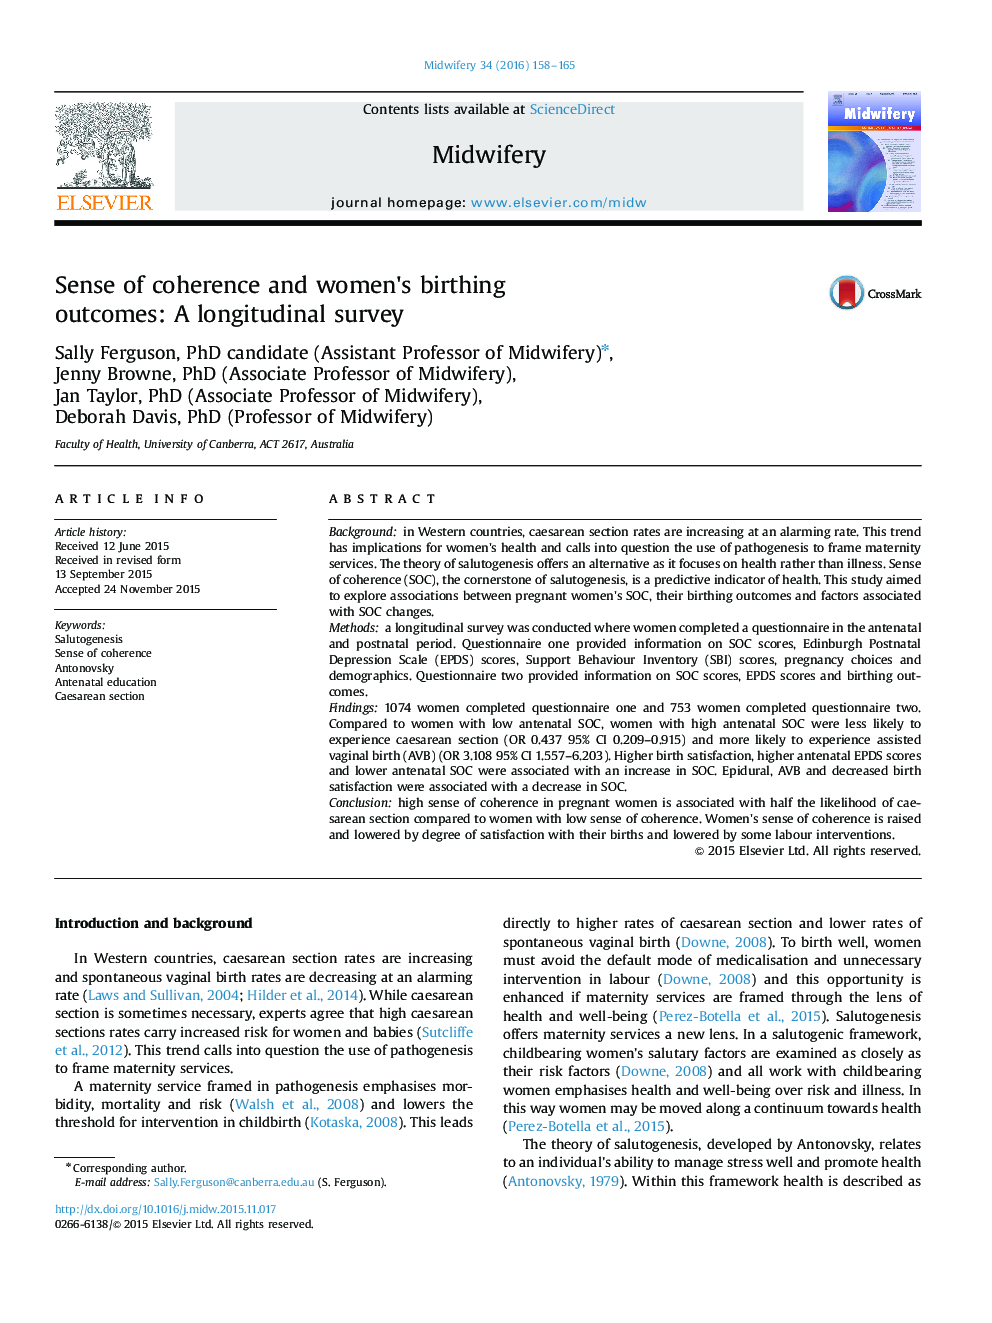 Sense of coherence and women×³s birthing outcomes: A longitudinal survey